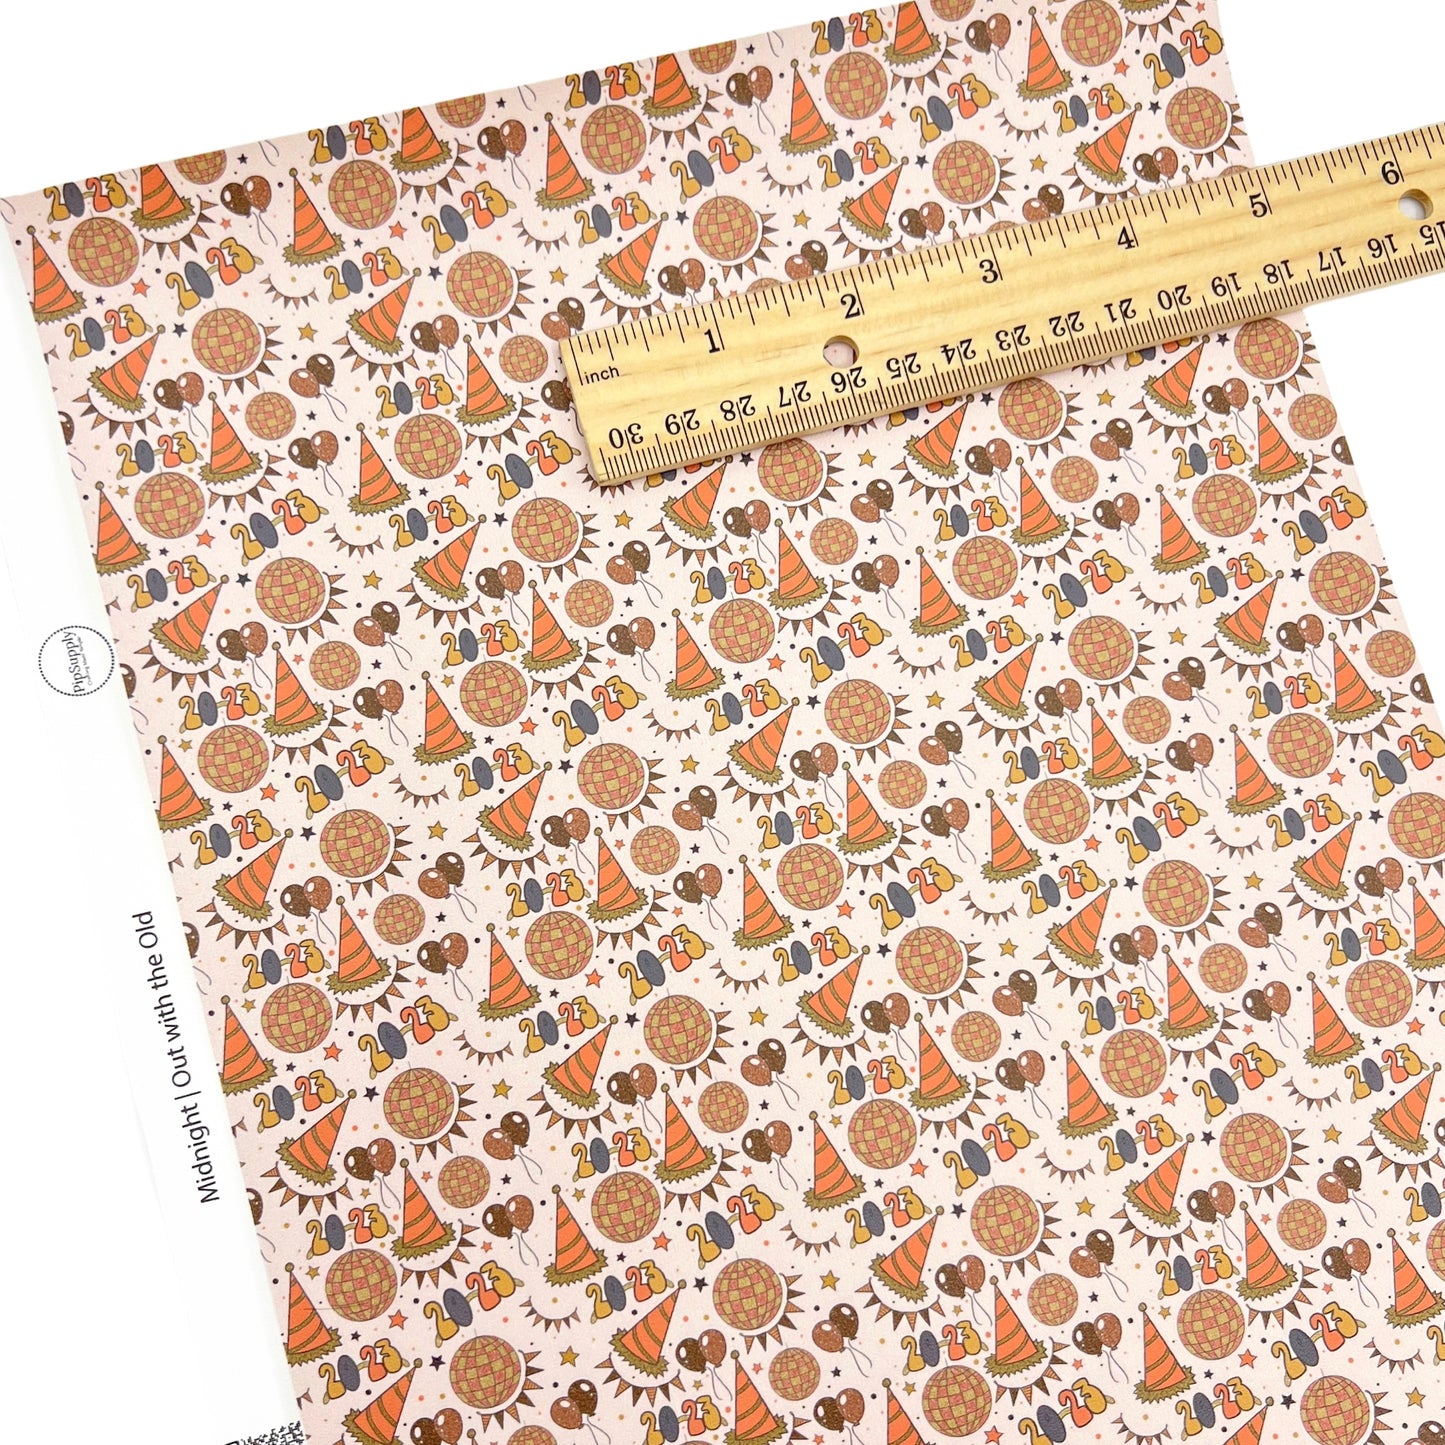 Peach colored faux leather sheet with party hats and baloon designs